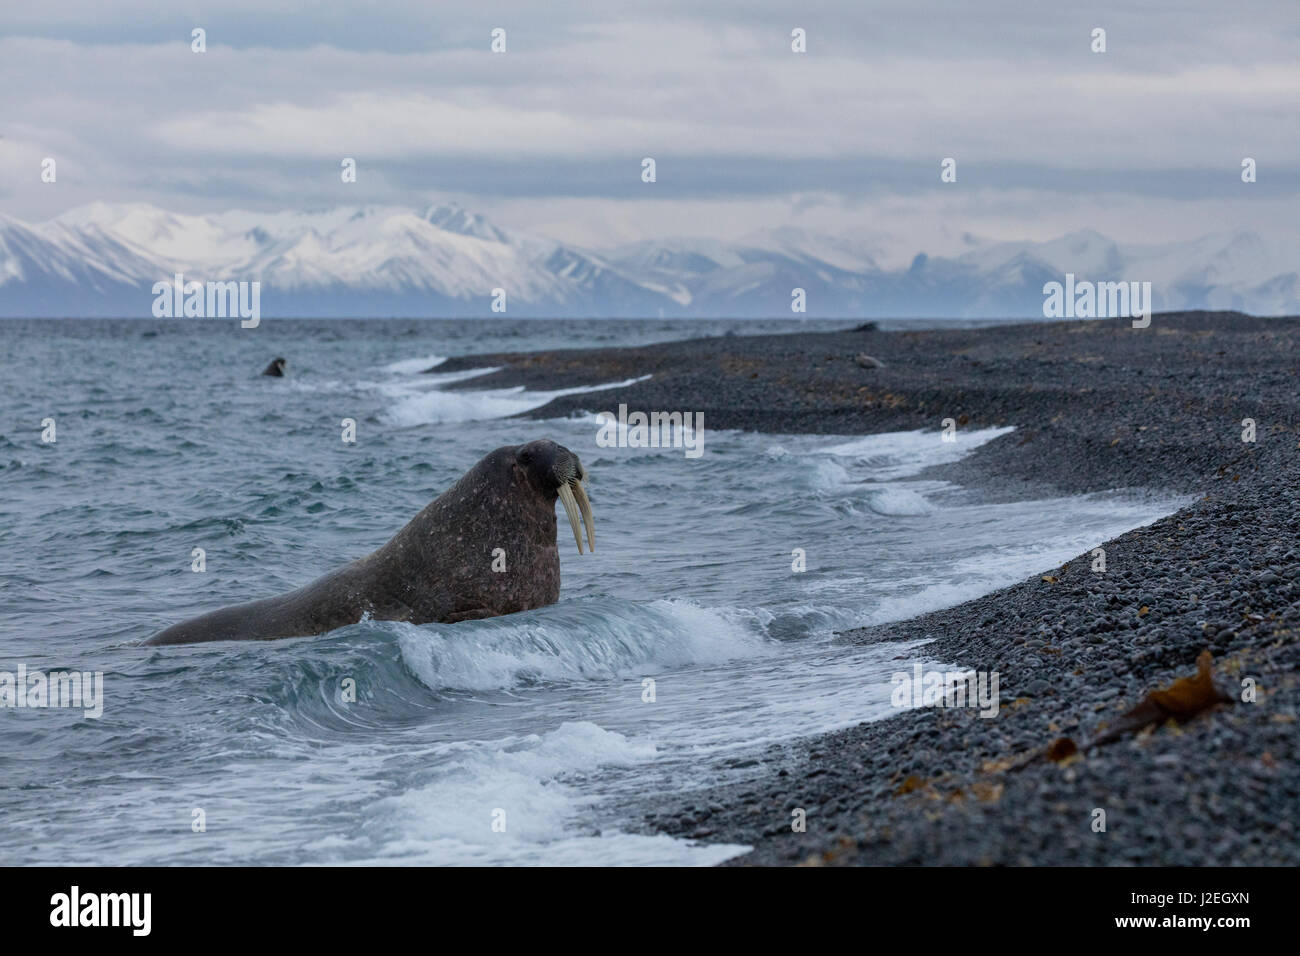 Norway, Svalbard, Moffen. Walrus emerges from water on beach. Credit as: Josh Anon / Jaynes Gallery / DanitaDelimont.com Stock Photo